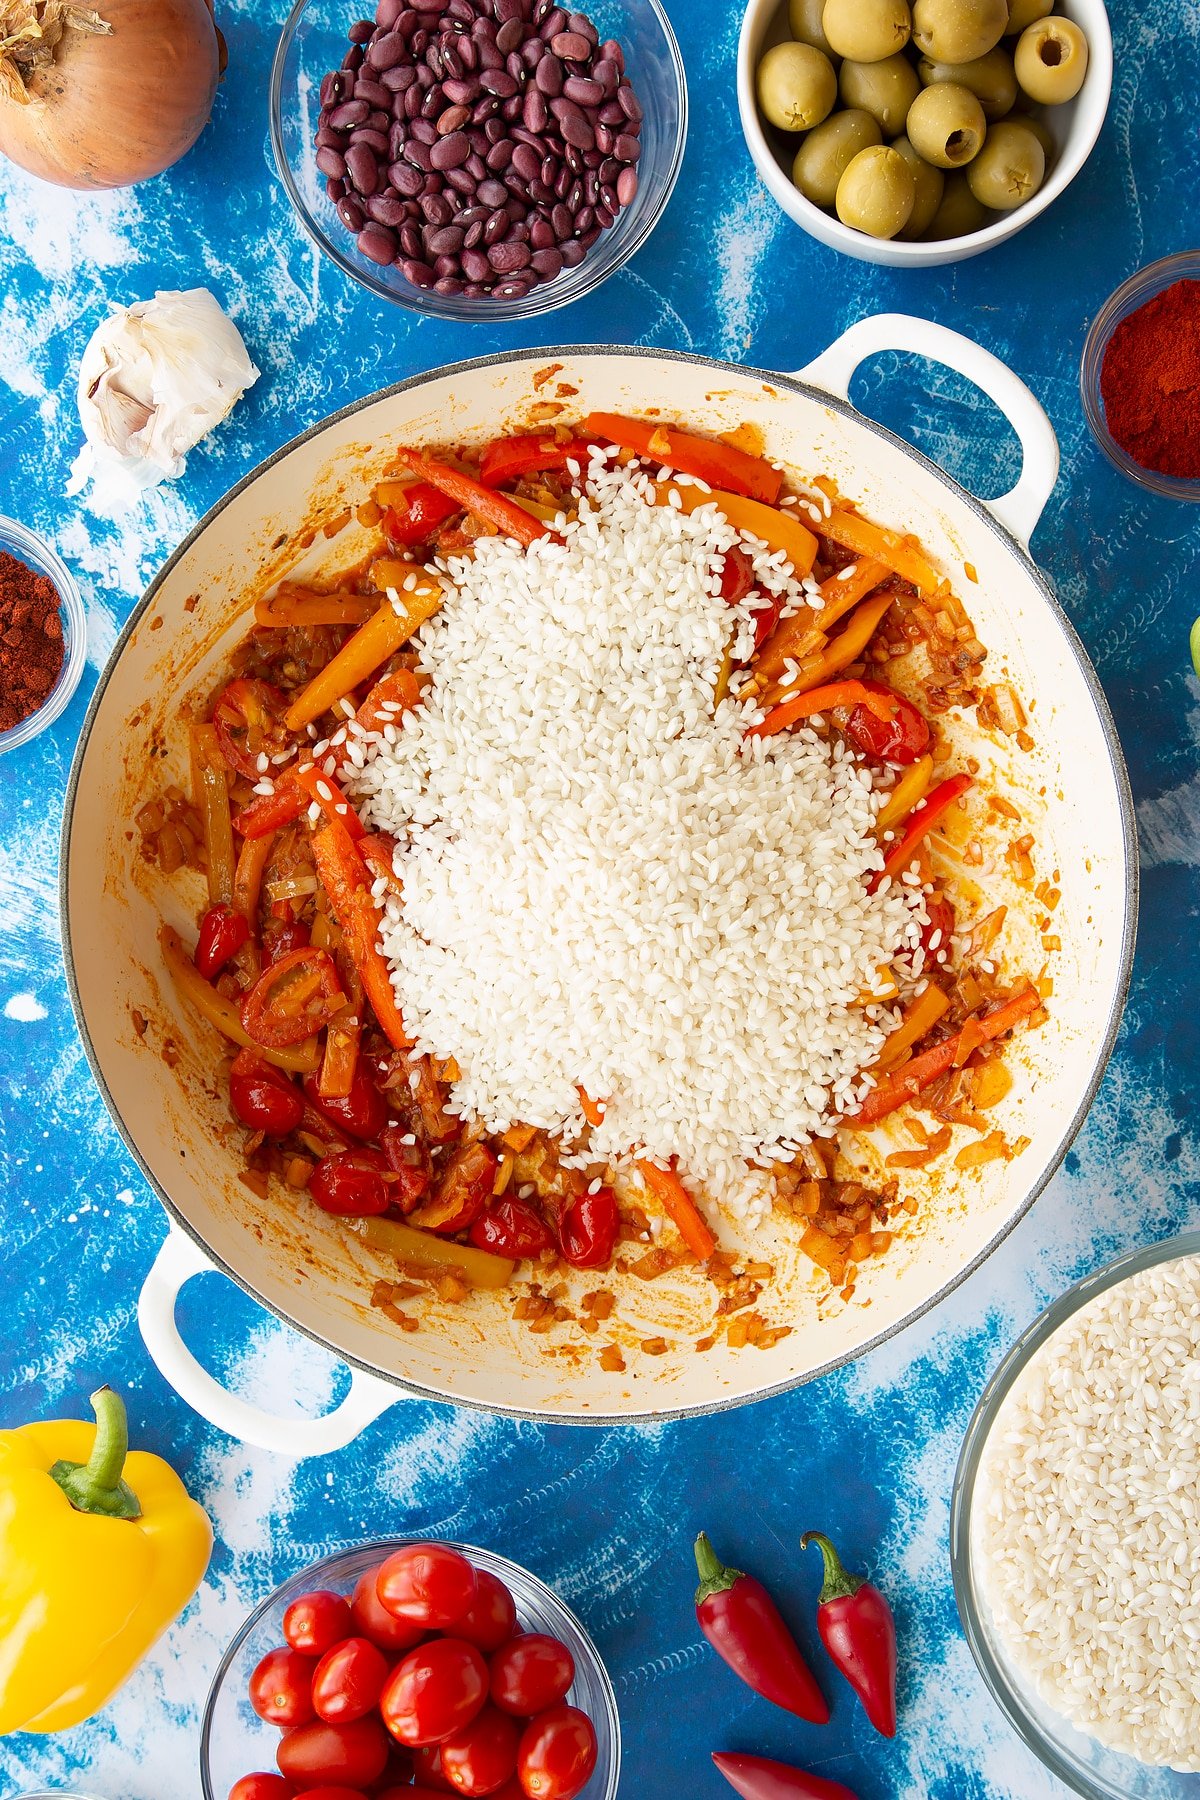 Sweated onions, spices, tomatoes and mixed sliced peppers in a pan with arborio rice on top. Ingredients to make easy Spanish rice and beans surround the pan.